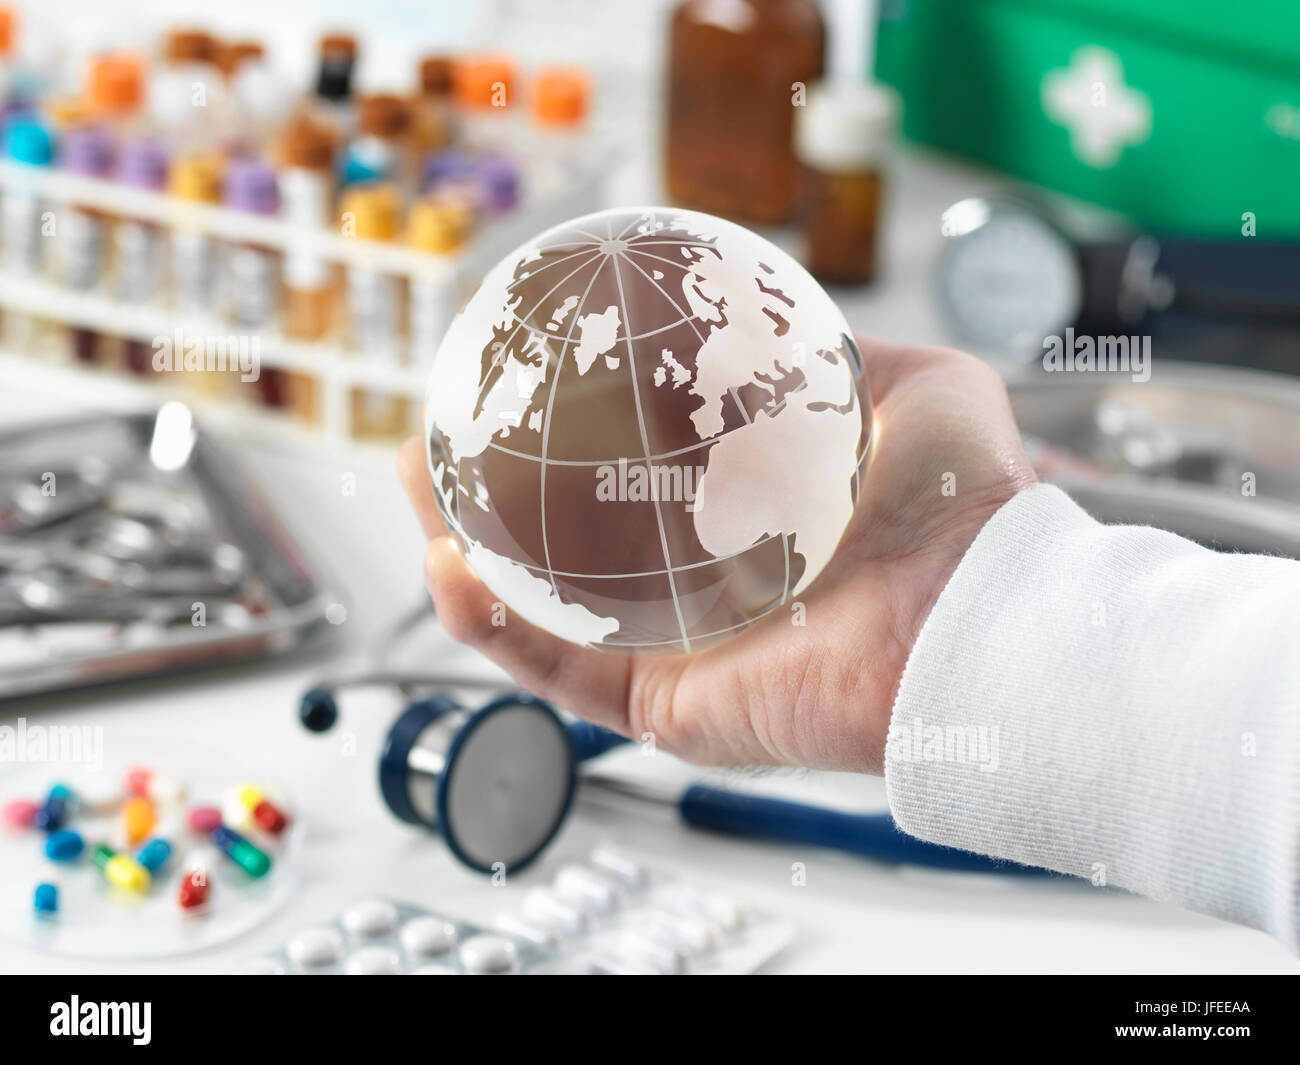 MODEL RELEASED. Global healthcare, conceptual image. Stock Photo